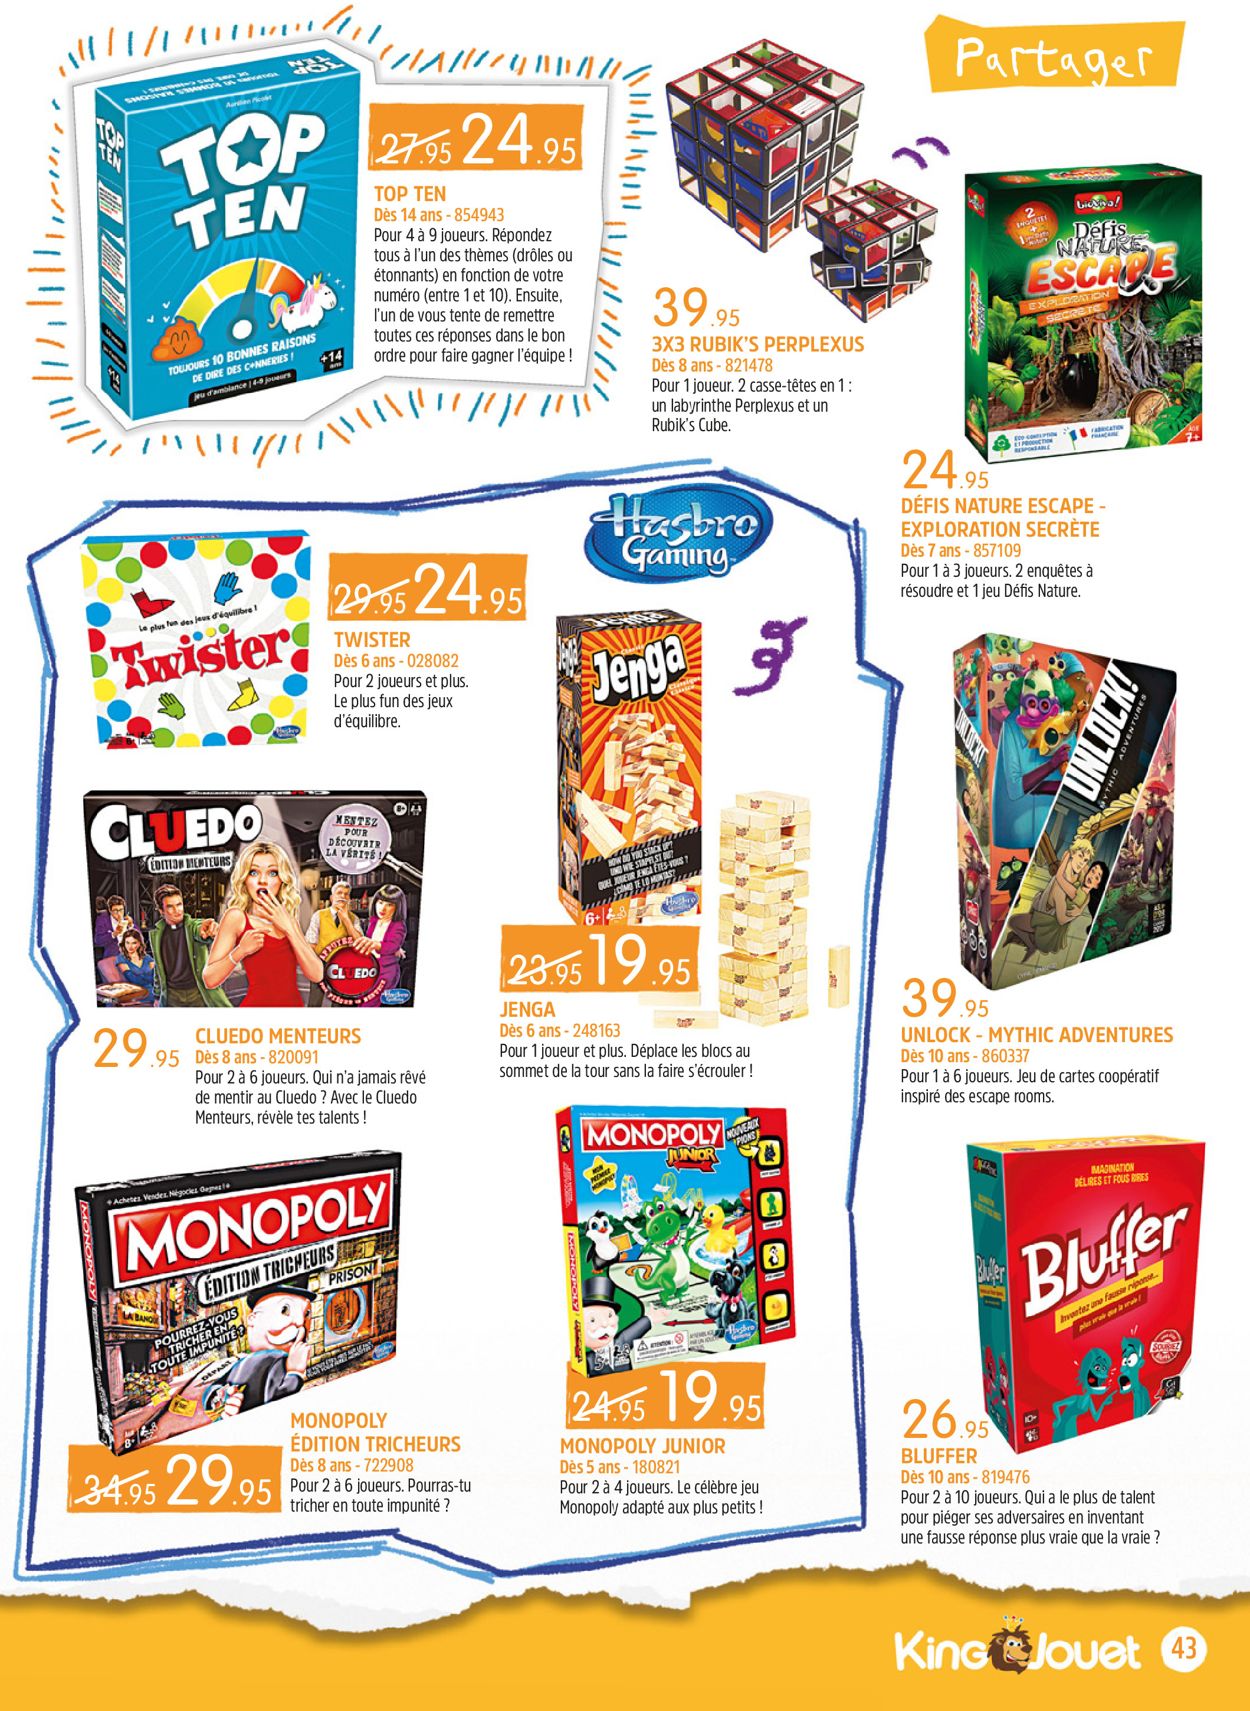 King Jouet Catalogue - 22.03-17.05.2021 (Page 43)